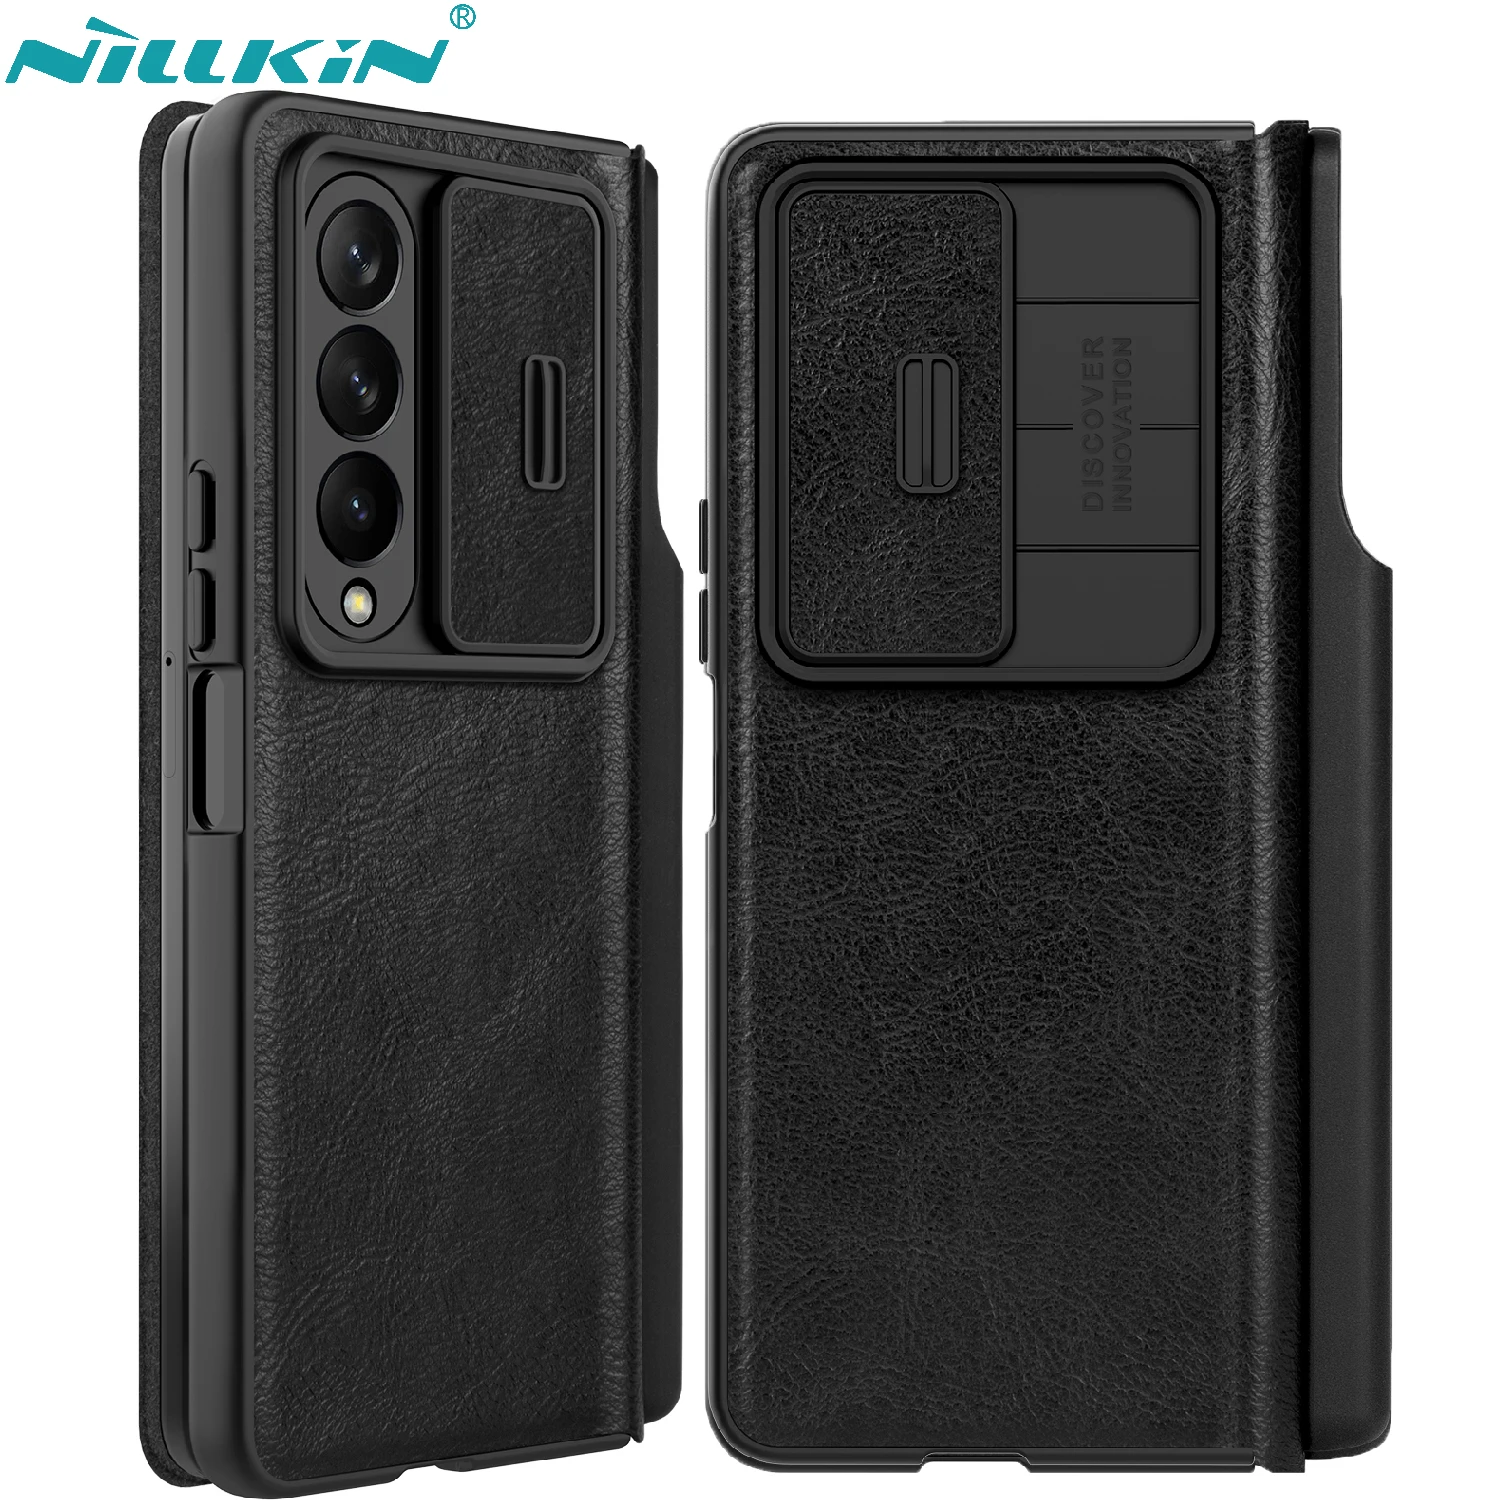 

NILLKIN Qin Flip Leather Case For Samsung Galaxy Z Fold 4 5G Kickstand With S-Pen Pocket For Z Fold 4 Slide Camera Back Cover